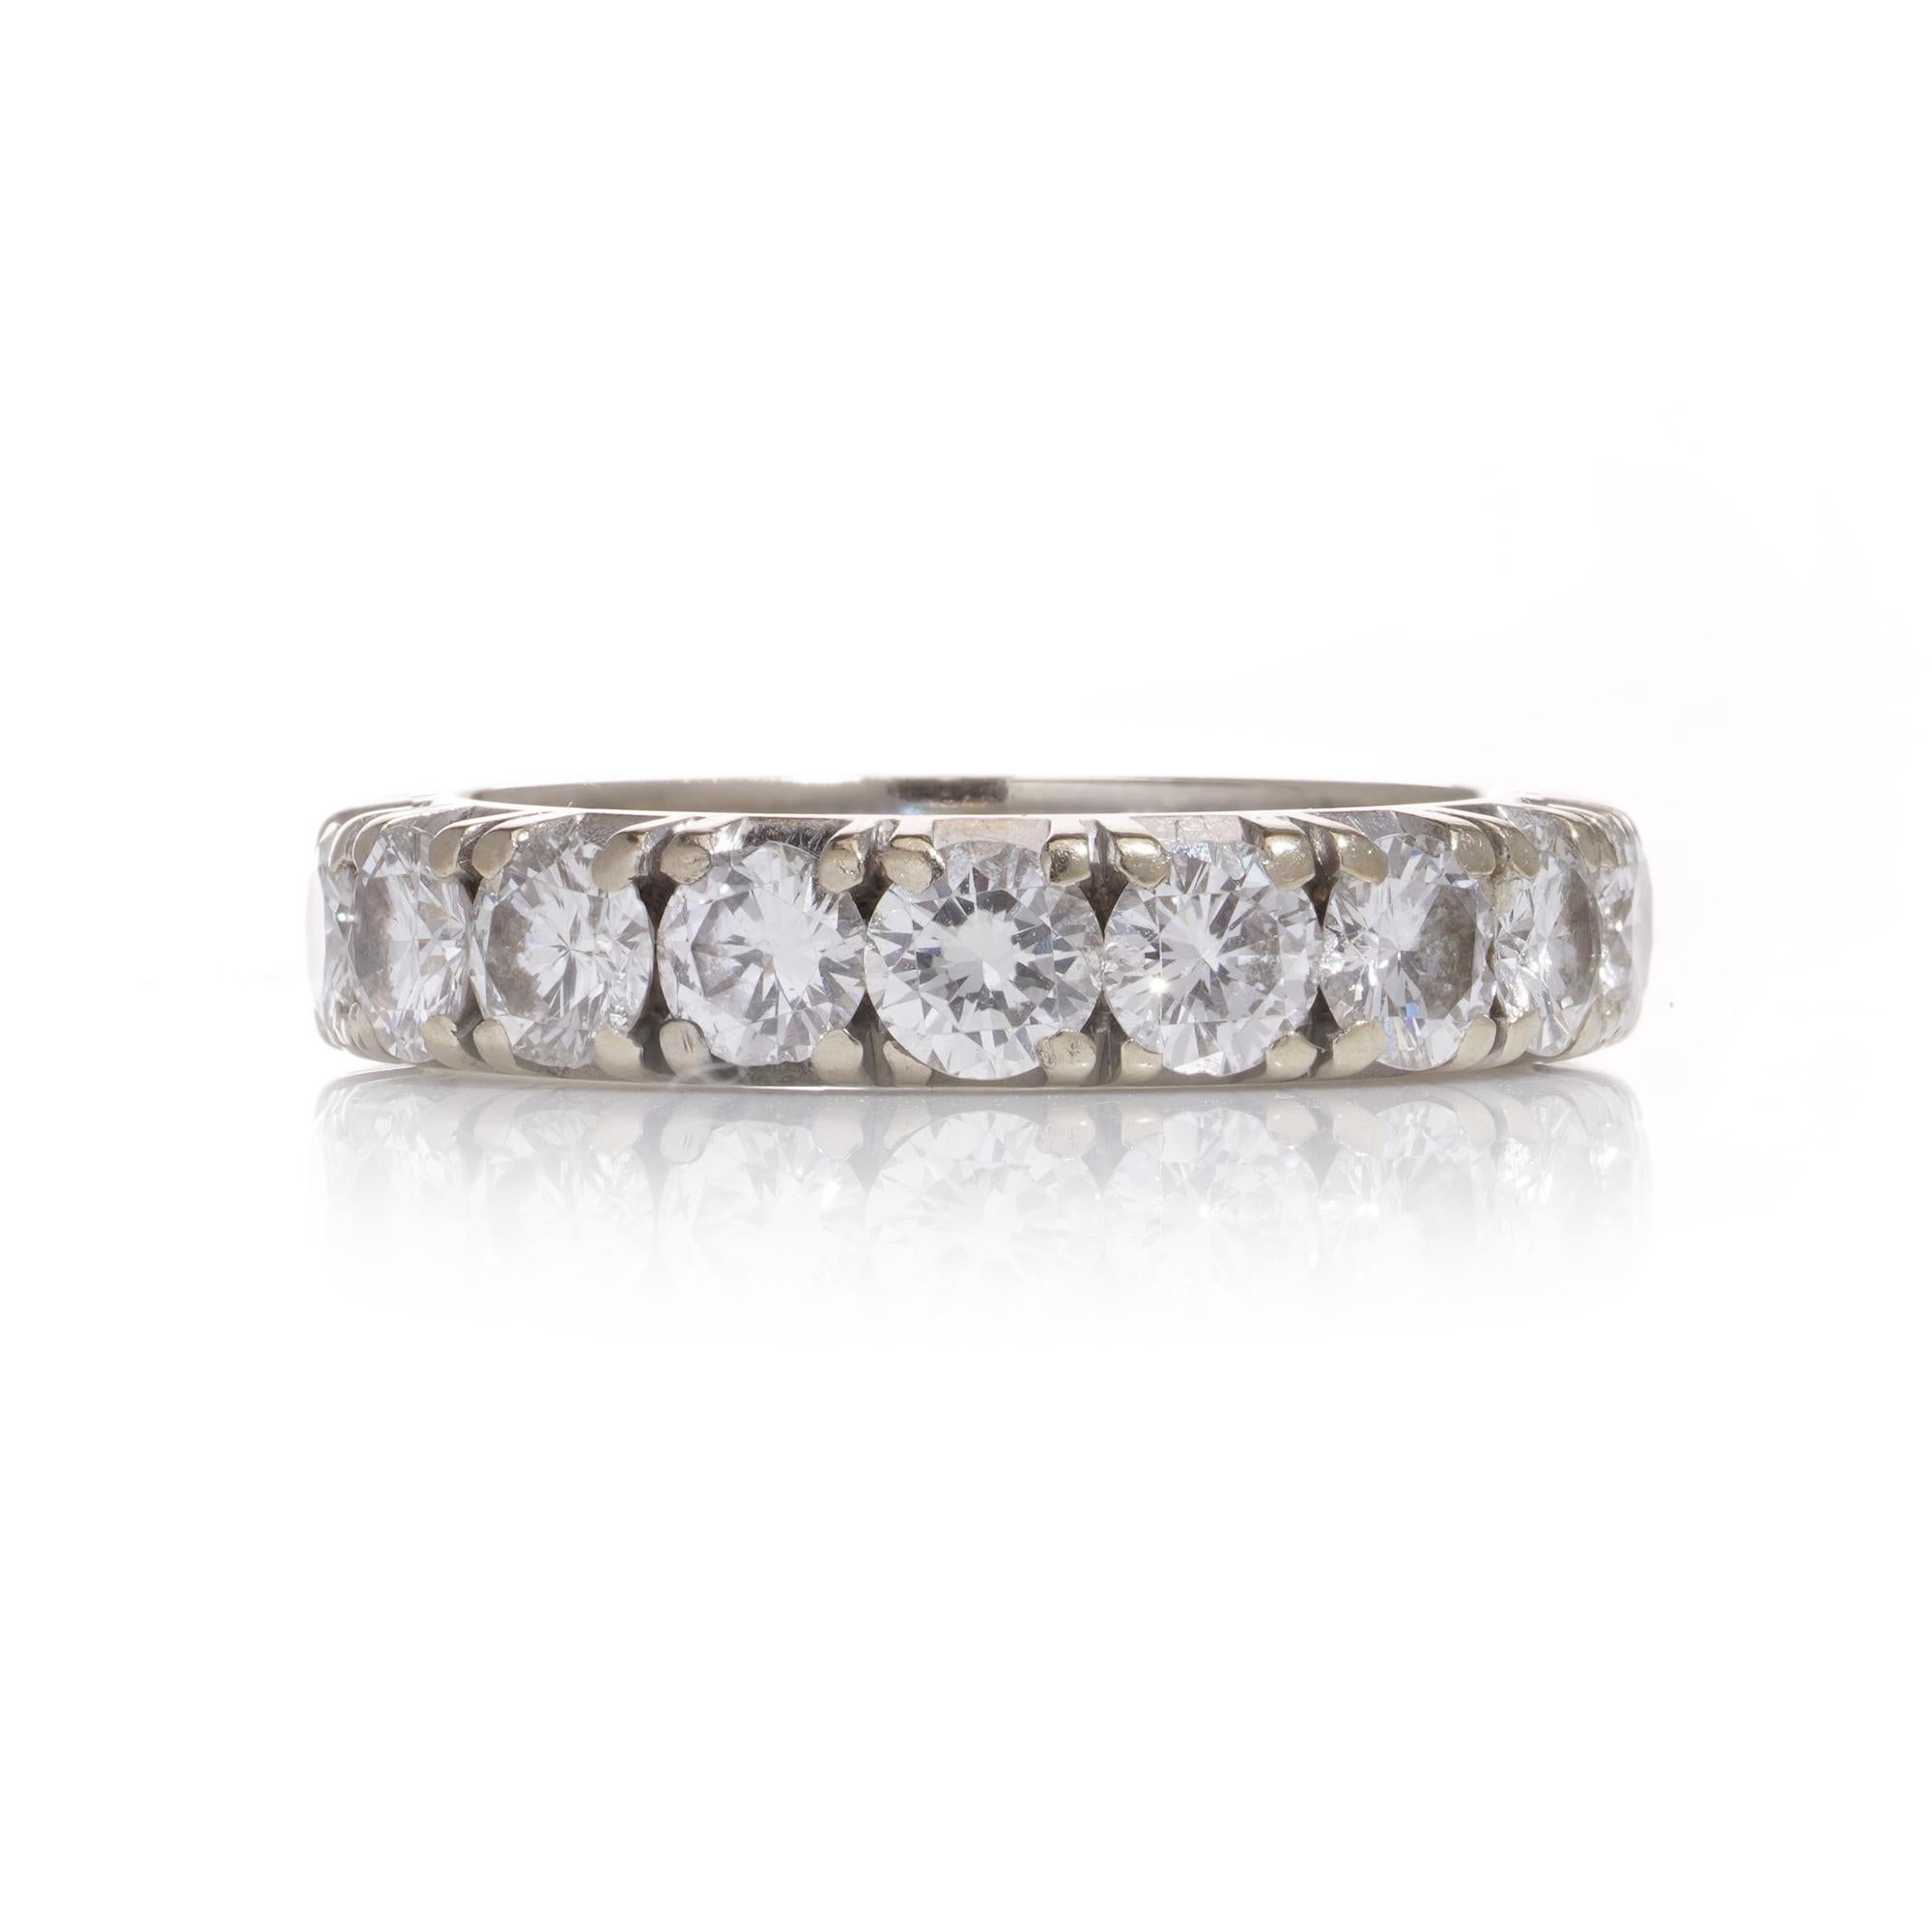 18k Gold Diamond Eternity Band Ring with 3.24 cts. of diamonds  For Sale 3